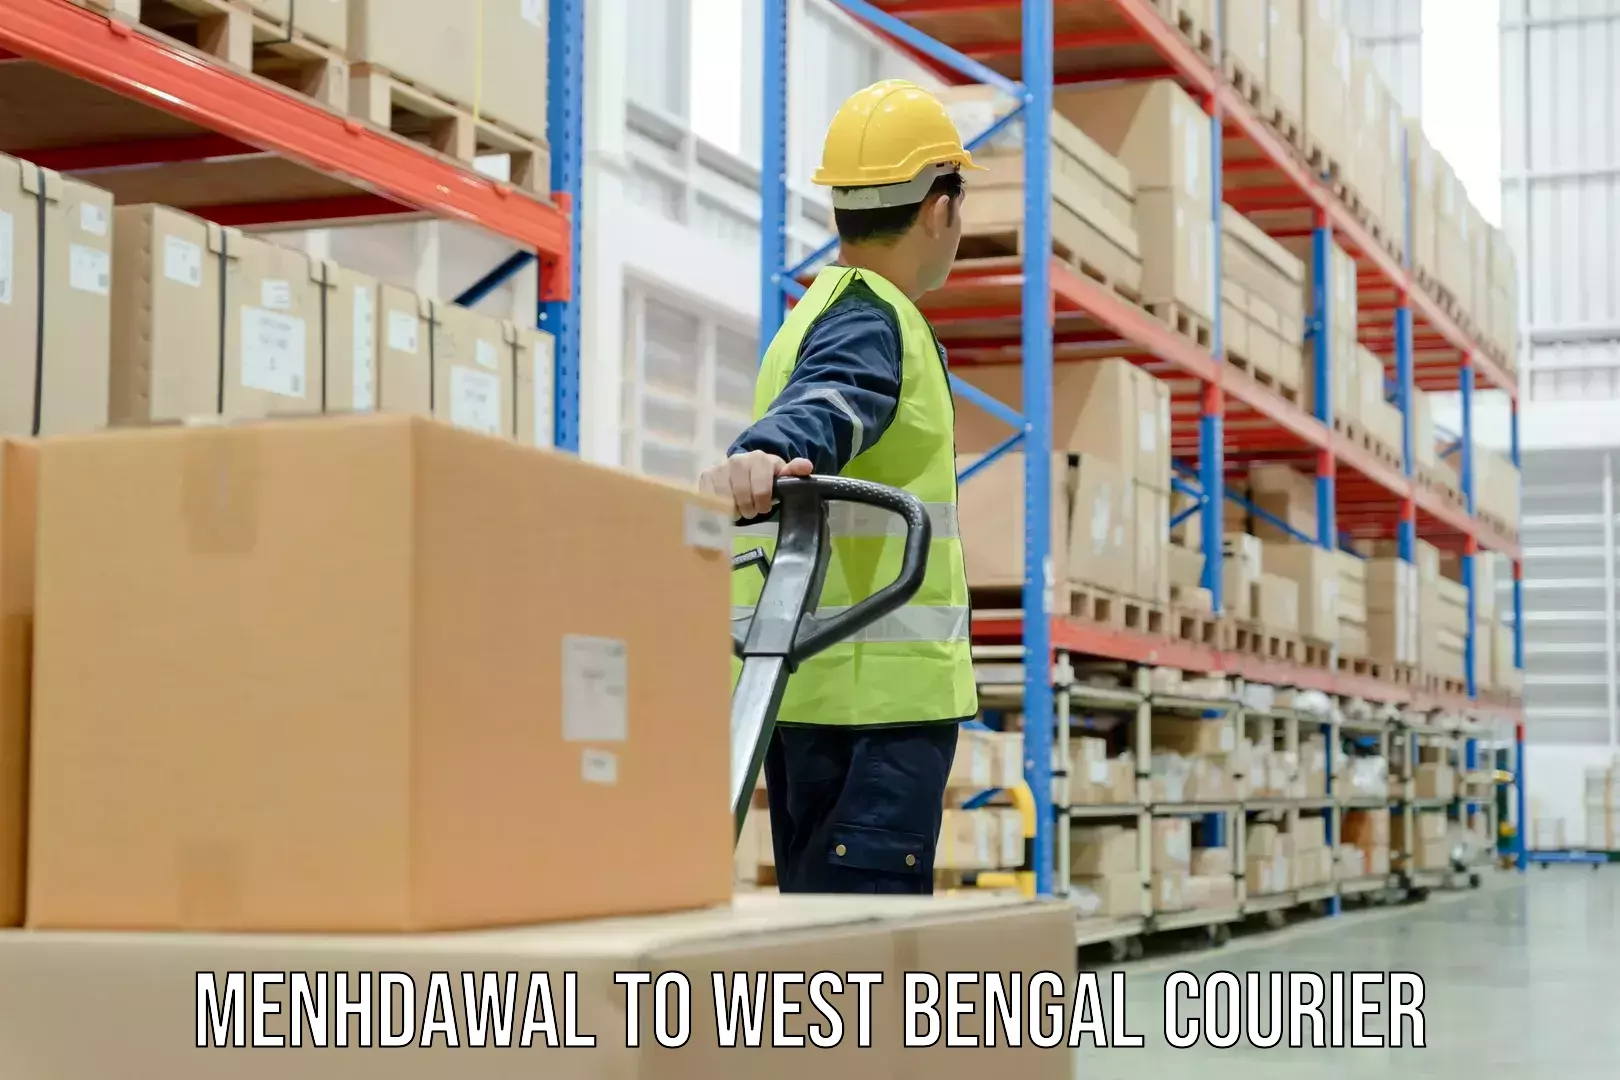 International courier networks Menhdawal to Joypul